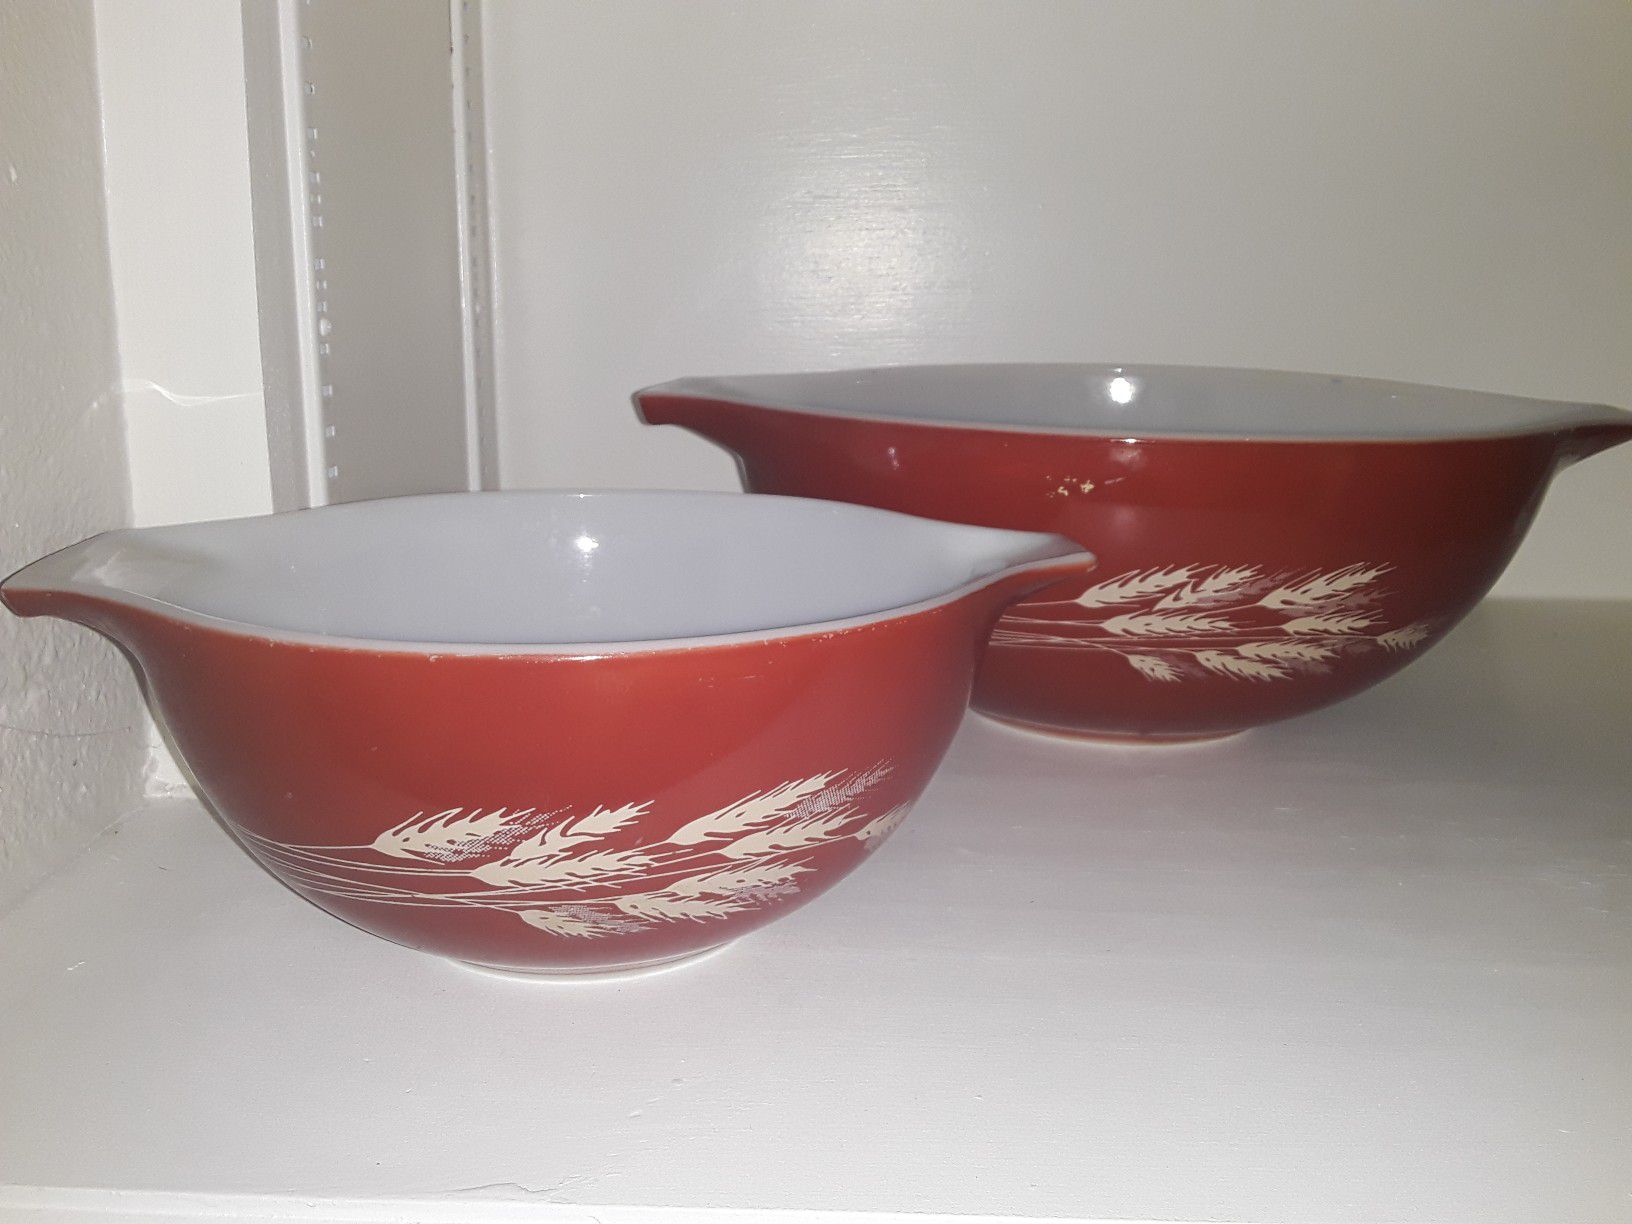 Pyrex harvest wheat nesting bowls. Two: one large and one small.